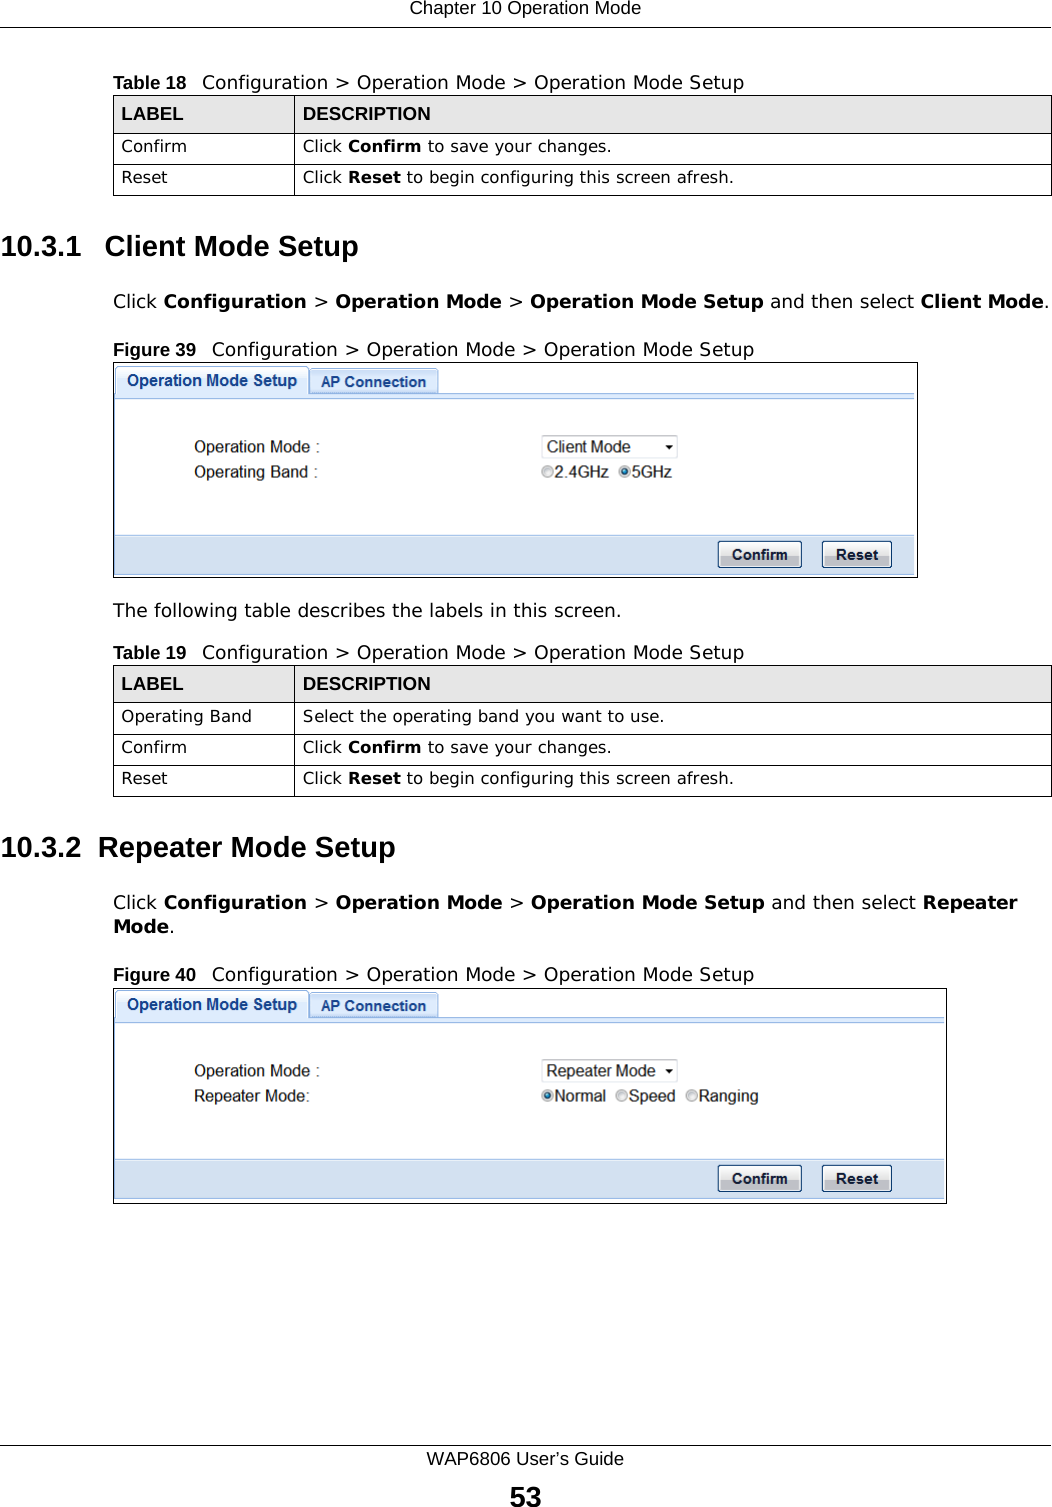 Chapter 10 Operation ModeWAP6806 User’s Guide5310.3.1   Client Mode SetupClick Configuration &gt; Operation Mode &gt; Operation Mode Setup and then select Client Mode.Figure 39   Configuration &gt; Operation Mode &gt; Operation Mode Setup The following table describes the labels in this screen. 10.3.2  Repeater Mode SetupClick Configuration &gt; Operation Mode &gt; Operation Mode Setup and then select Repeater Mode.Figure 40   Configuration &gt; Operation Mode &gt; Operation Mode Setup Confirm Click Confirm to save your changes.Reset Click Reset to begin configuring this screen afresh.Table 18   Configuration &gt; Operation Mode &gt; Operation Mode SetupLABEL DESCRIPTIONTable 19   Configuration &gt; Operation Mode &gt; Operation Mode SetupLABEL DESCRIPTIONOperating Band Select the operating band you want to use.Confirm Click Confirm to save your changes.Reset Click Reset to begin configuring this screen afresh.